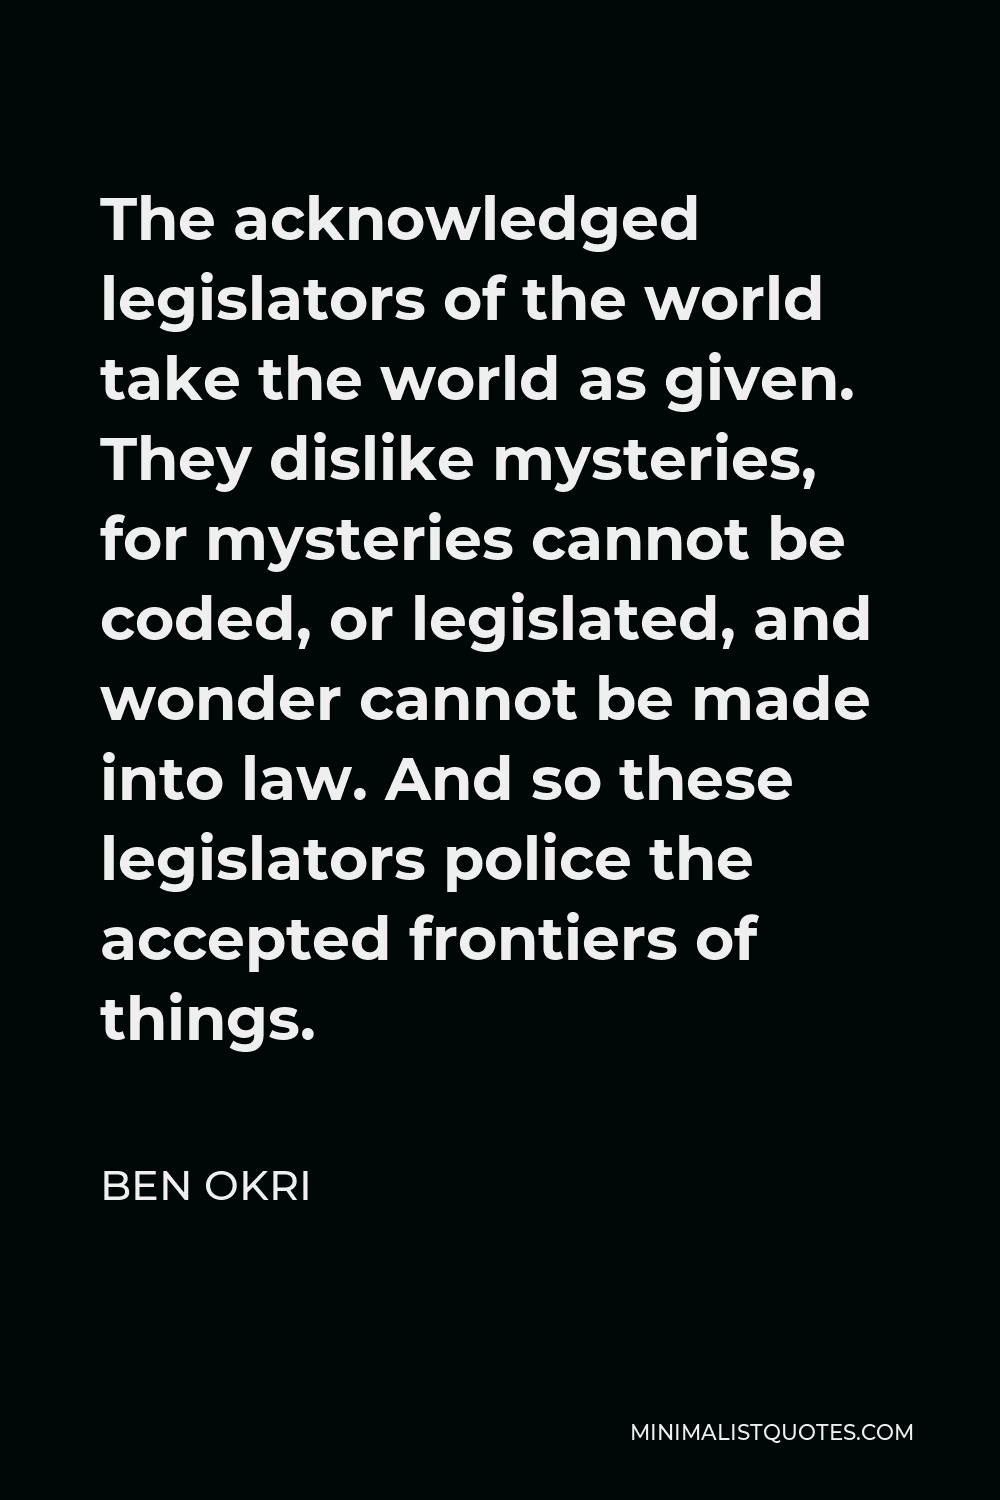 Ben Okri Quote - The acknowledged legislators of the world take the world as given. They dislike mysteries, for mysteries cannot be coded, or legislated, and wonder cannot be made into law. And so these legislators police the accepted frontiers of things.